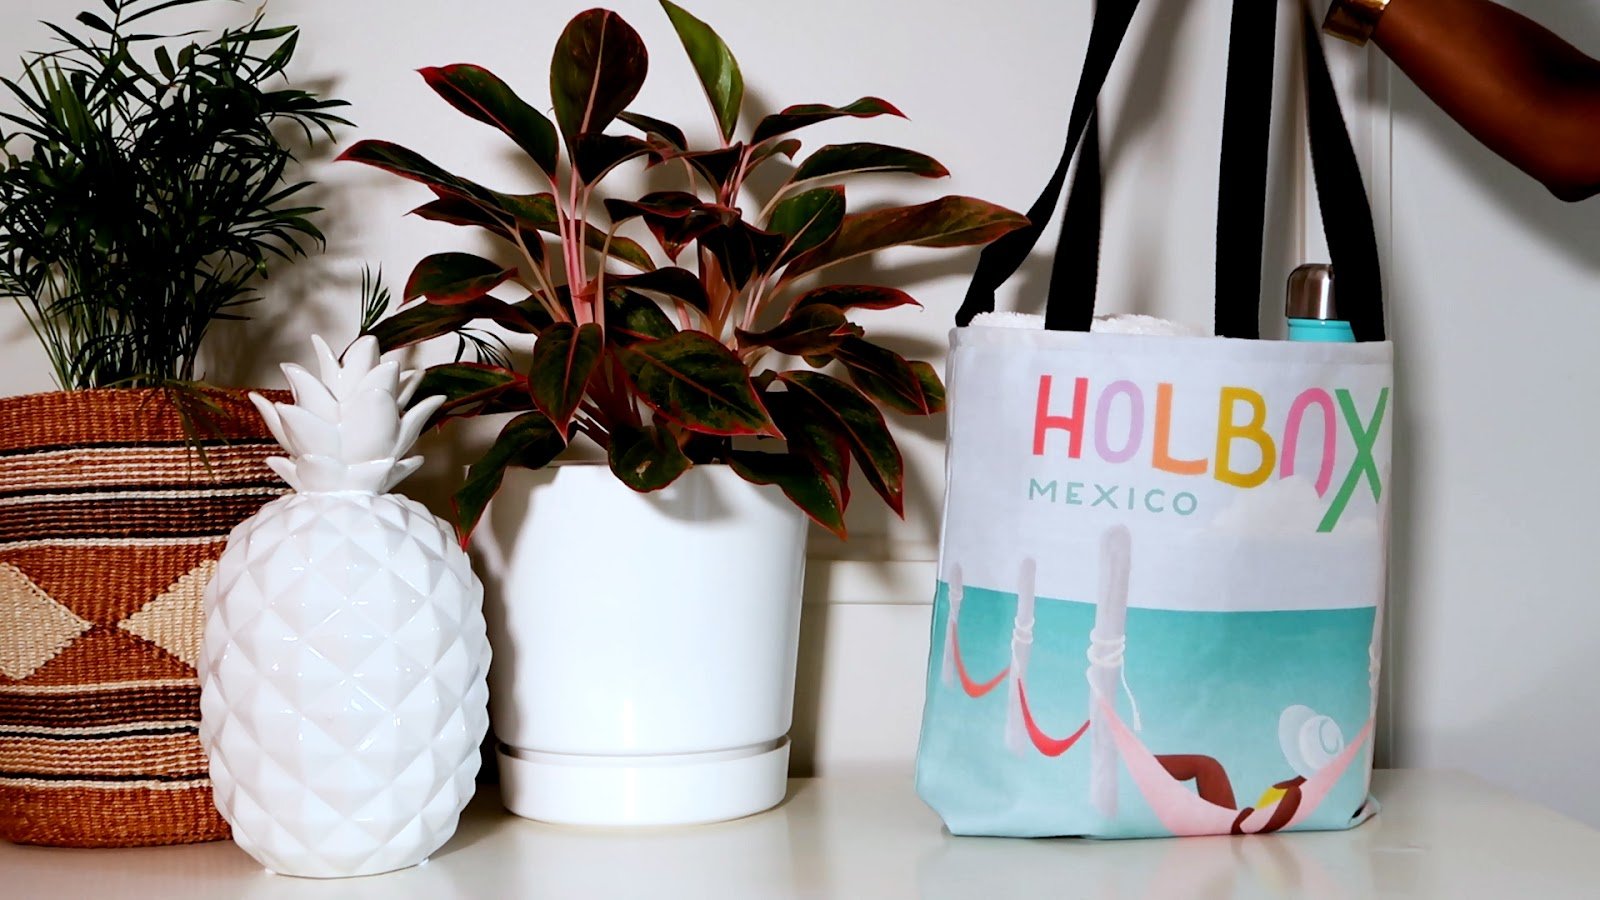 How to Make Custom Canvas Tote Bags with a Cricut Machine